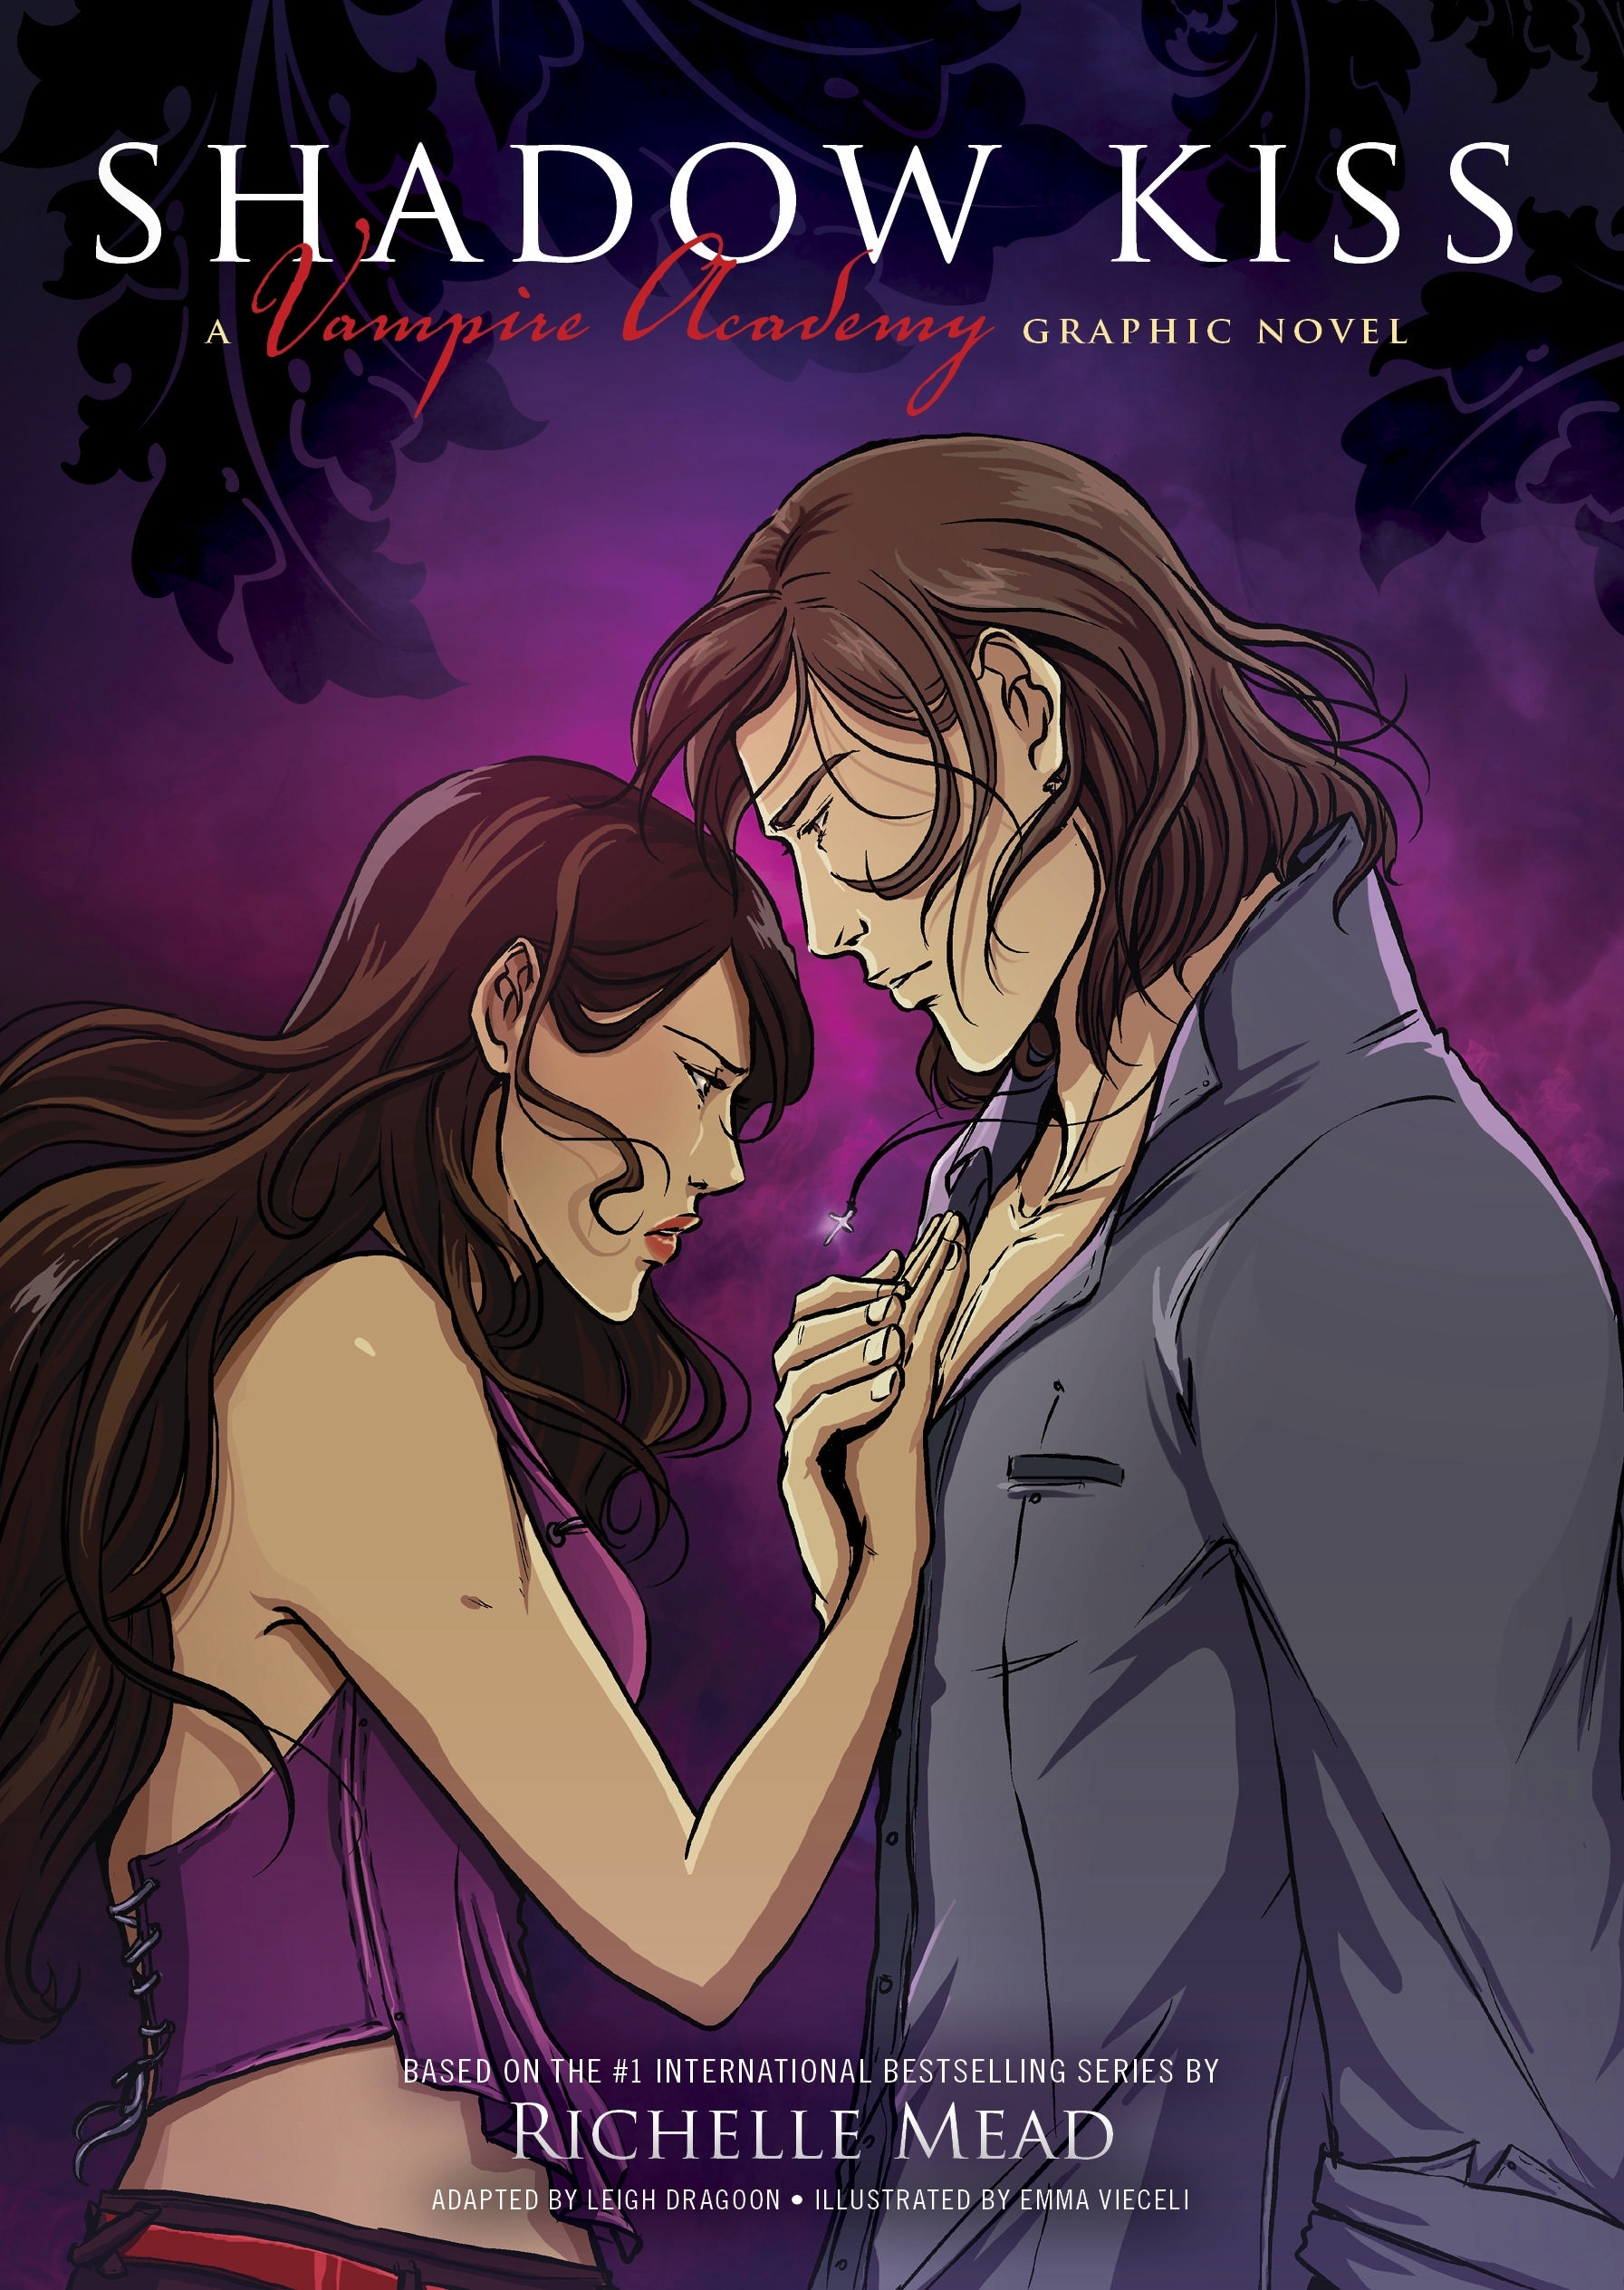 Shadow Kiss by Richelle Mead, illustrated by Emma Vieceli